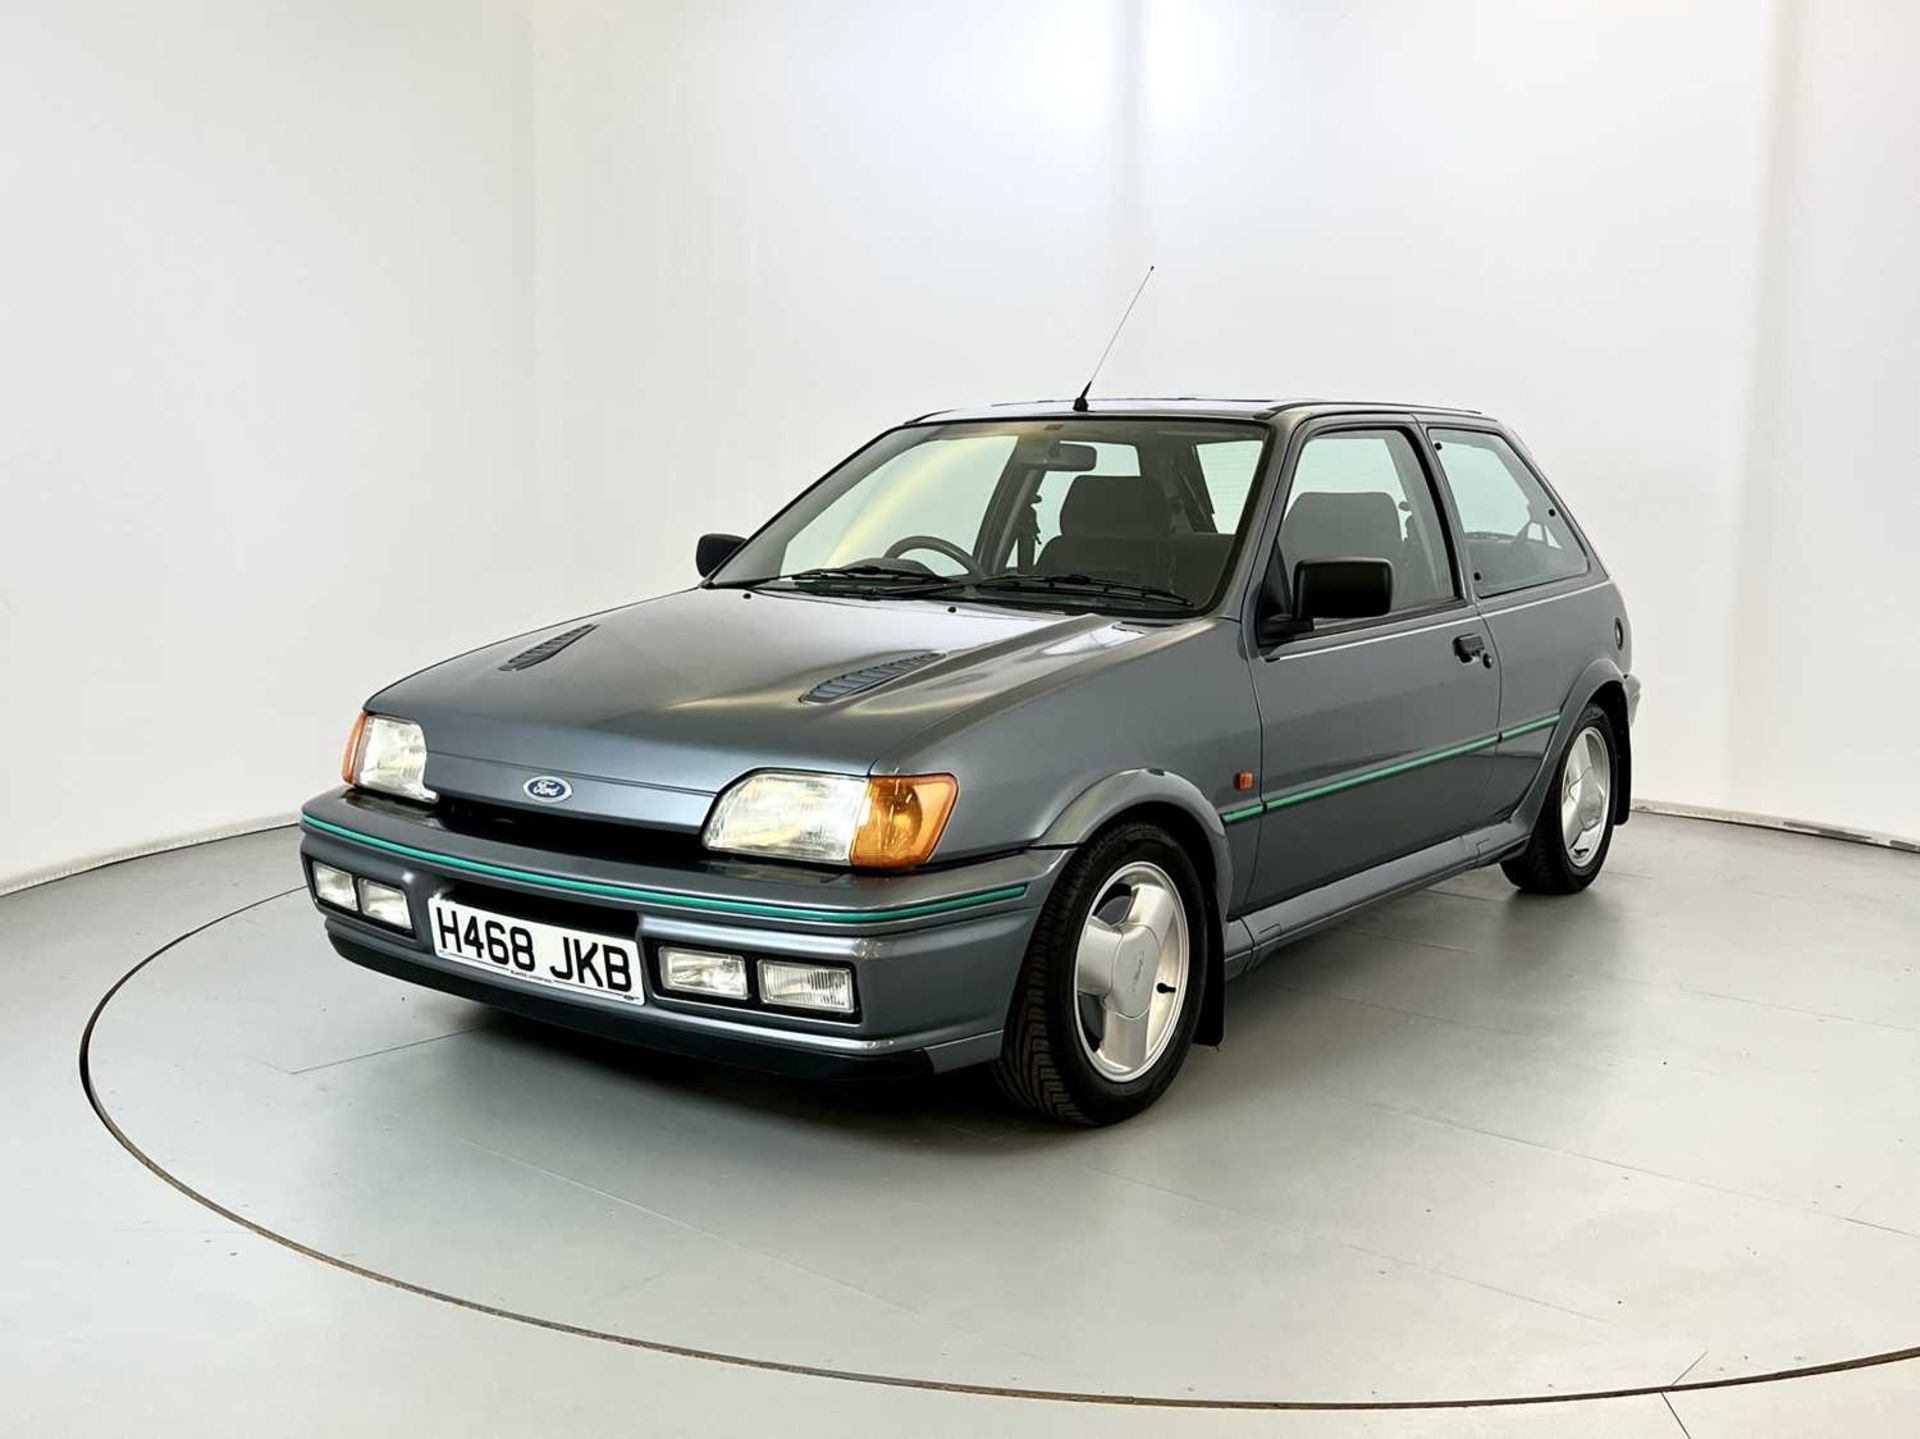 1991 Ford Fiesta RS Turbo - Image 3 of 32